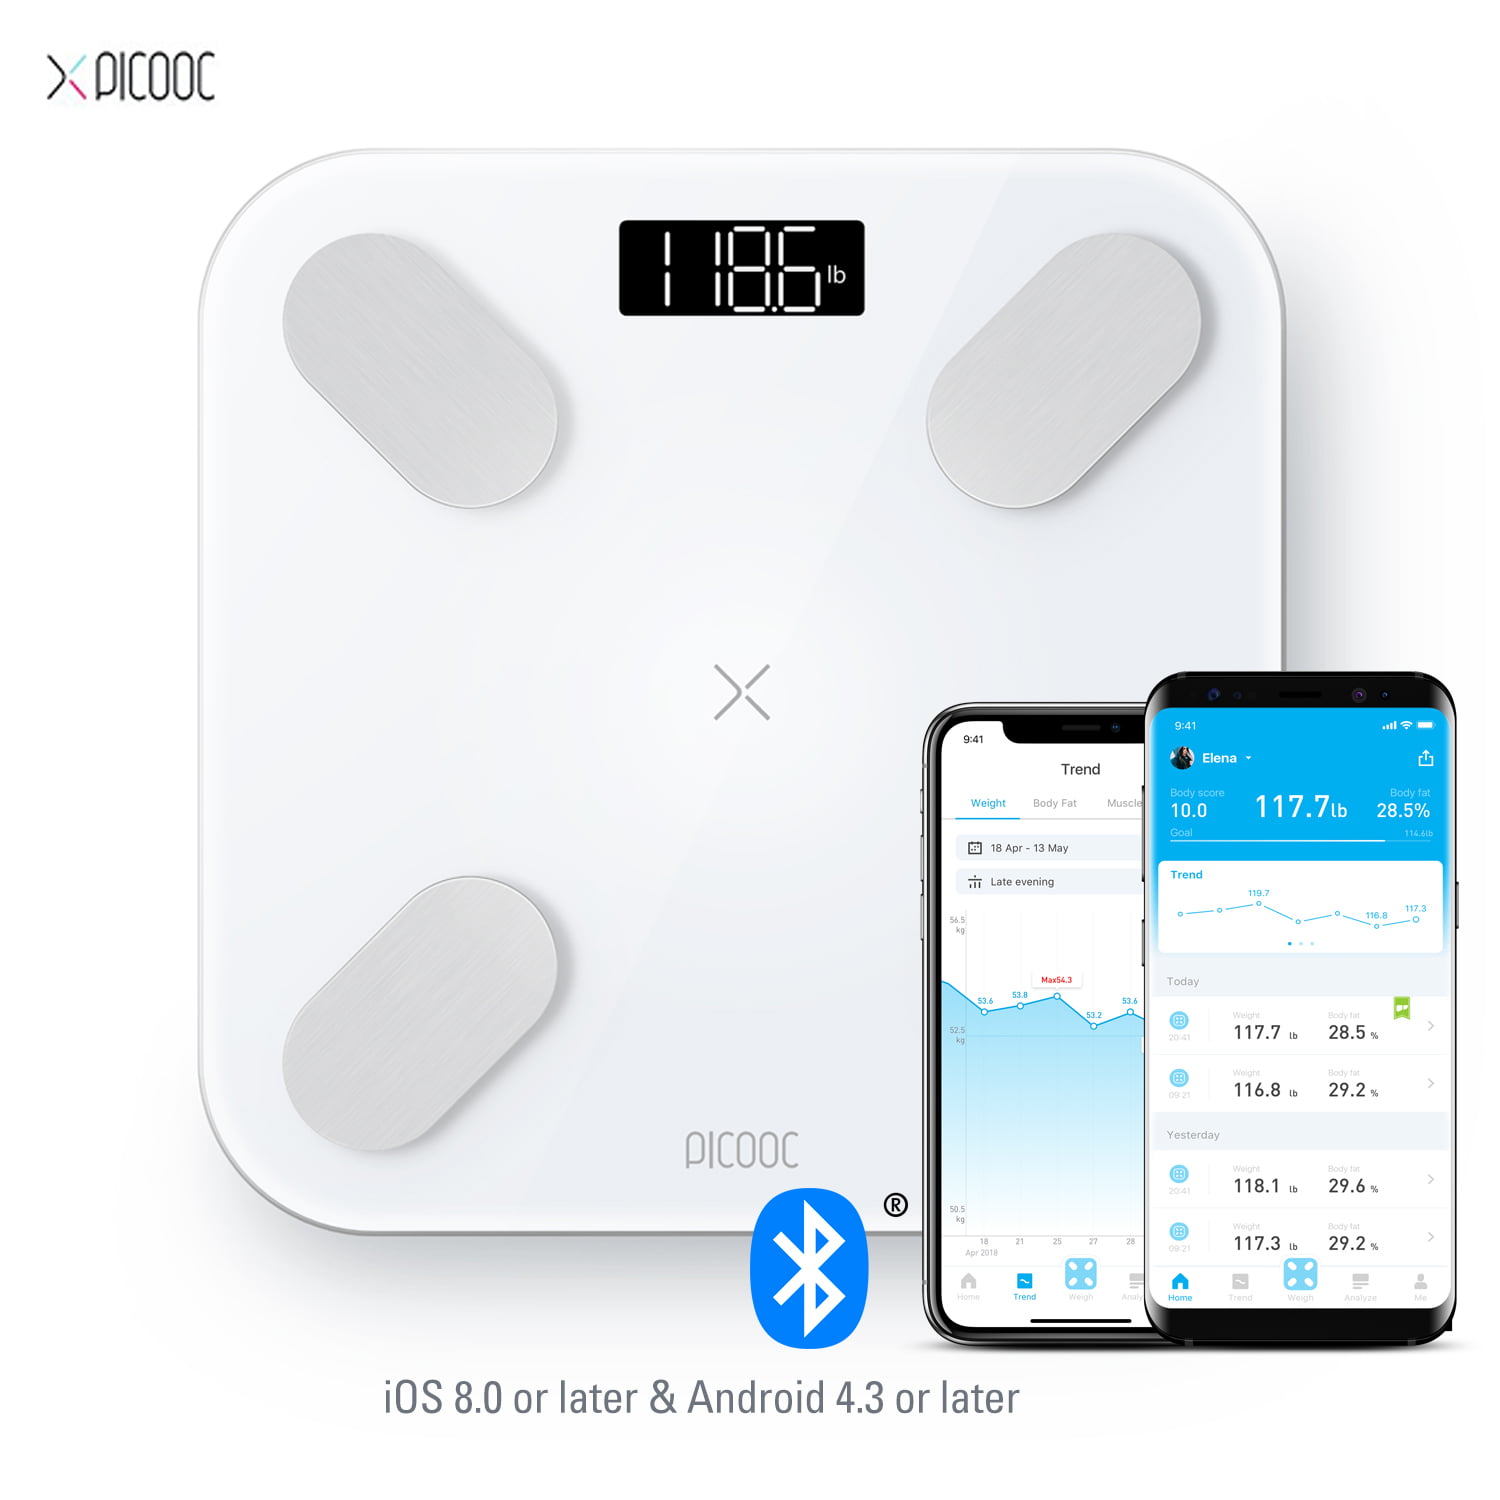  PICOOC Scale for Body Weight, Highly Accurate Digital Bathroom  Scale, Smart BMI Weight Scales with Bluetooth and Smartphone App, LED  Display, Round Corner Design, 330 lbs/150kg : Health & Household